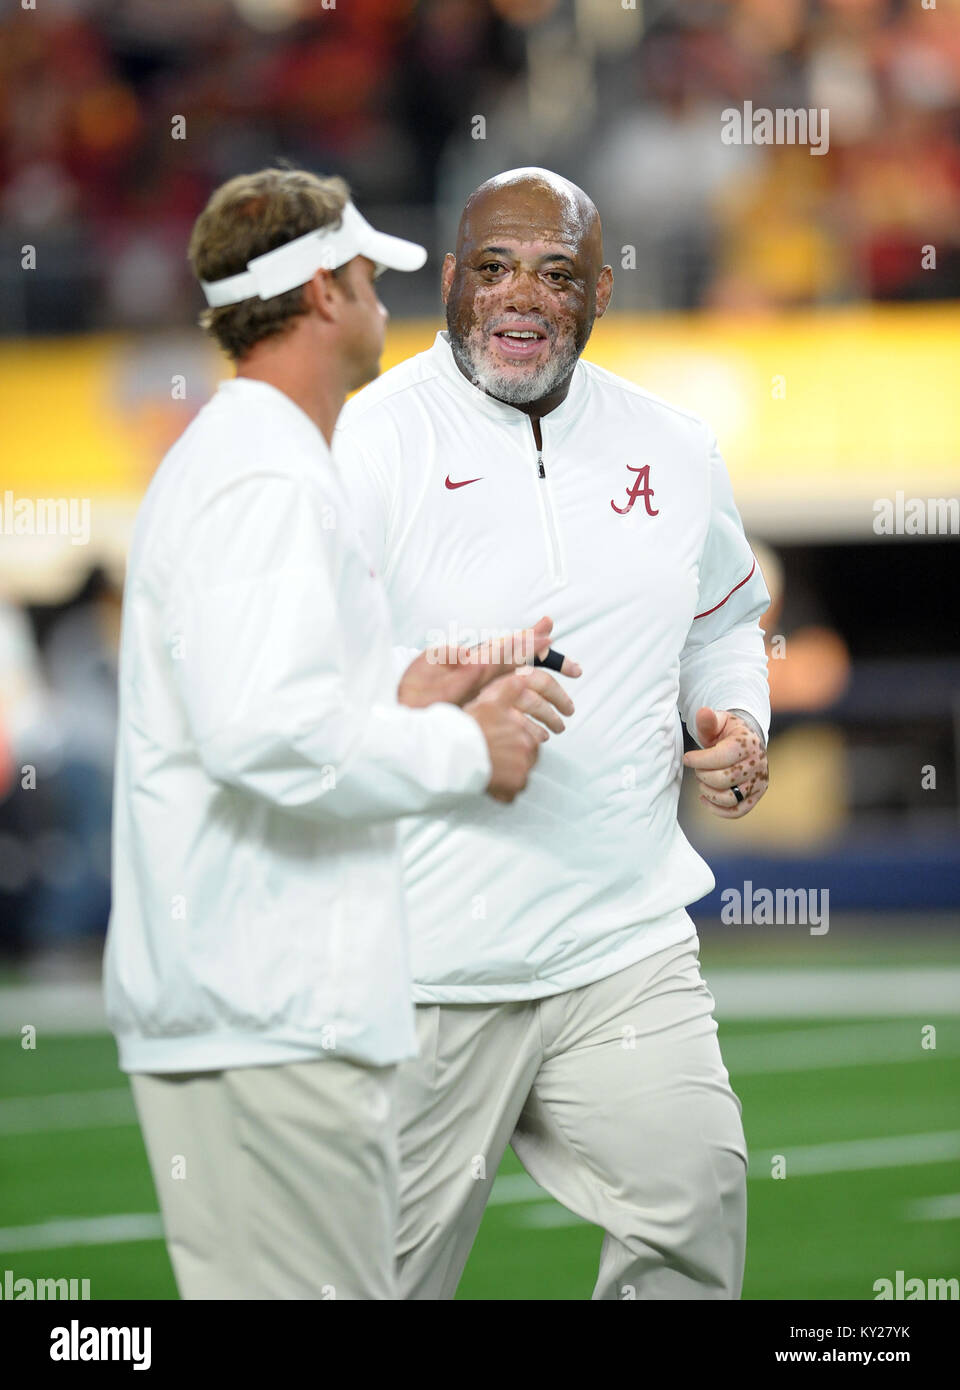 January 11, 2018 Tuscaloosa, AL.(FILE PHOTOS) Alabama defensive line coach Karl Dunbar (pictured here with former offensive coordinator Lane Kiffin) had his Alabama game-day playbook stolen from the team's official hotel in Atlanta where the team was staying at, two days before Alabama defeated Georgia to capture its fifth national championship in nine years, Dunbar reported his backpack stolen to Police.According to a copy of an incident report obtained by The Anniston Star, Dunbar told Atlanta police he left his backpack inside the defensive line meeting room at 12:45 p.m. on Saturday. W Stock Photo